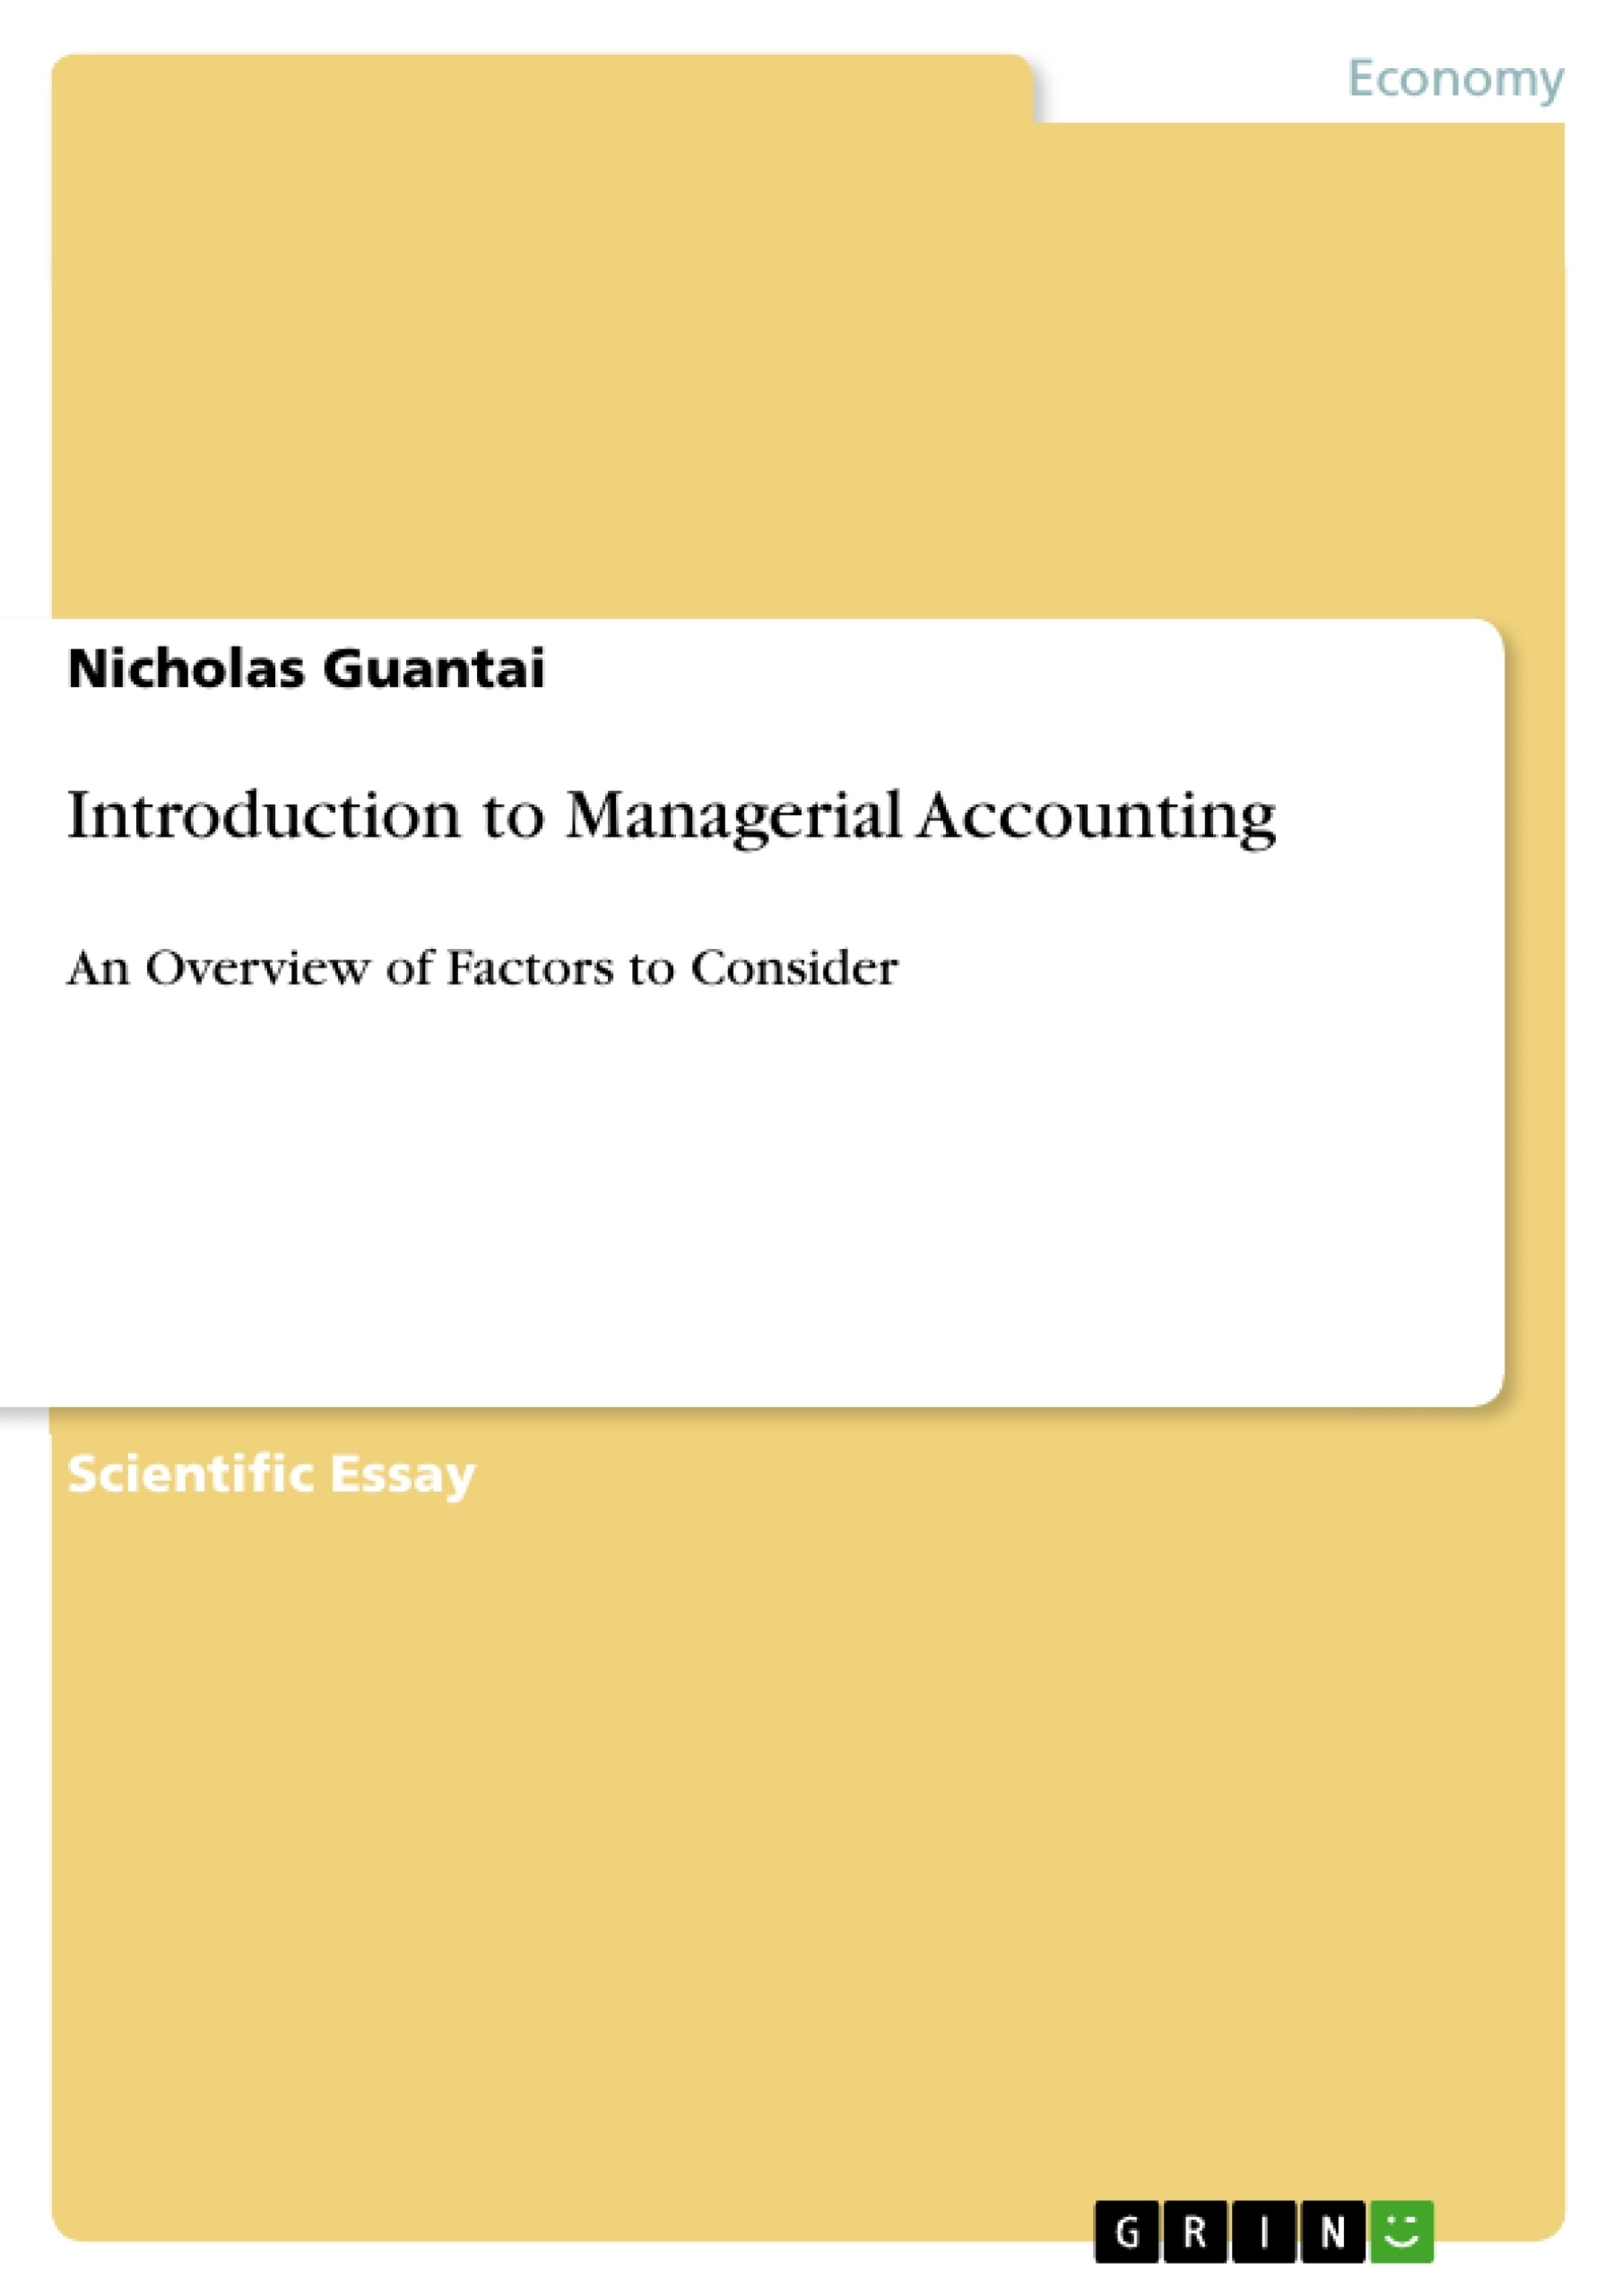 Title: Introduction to Managerial Accounting